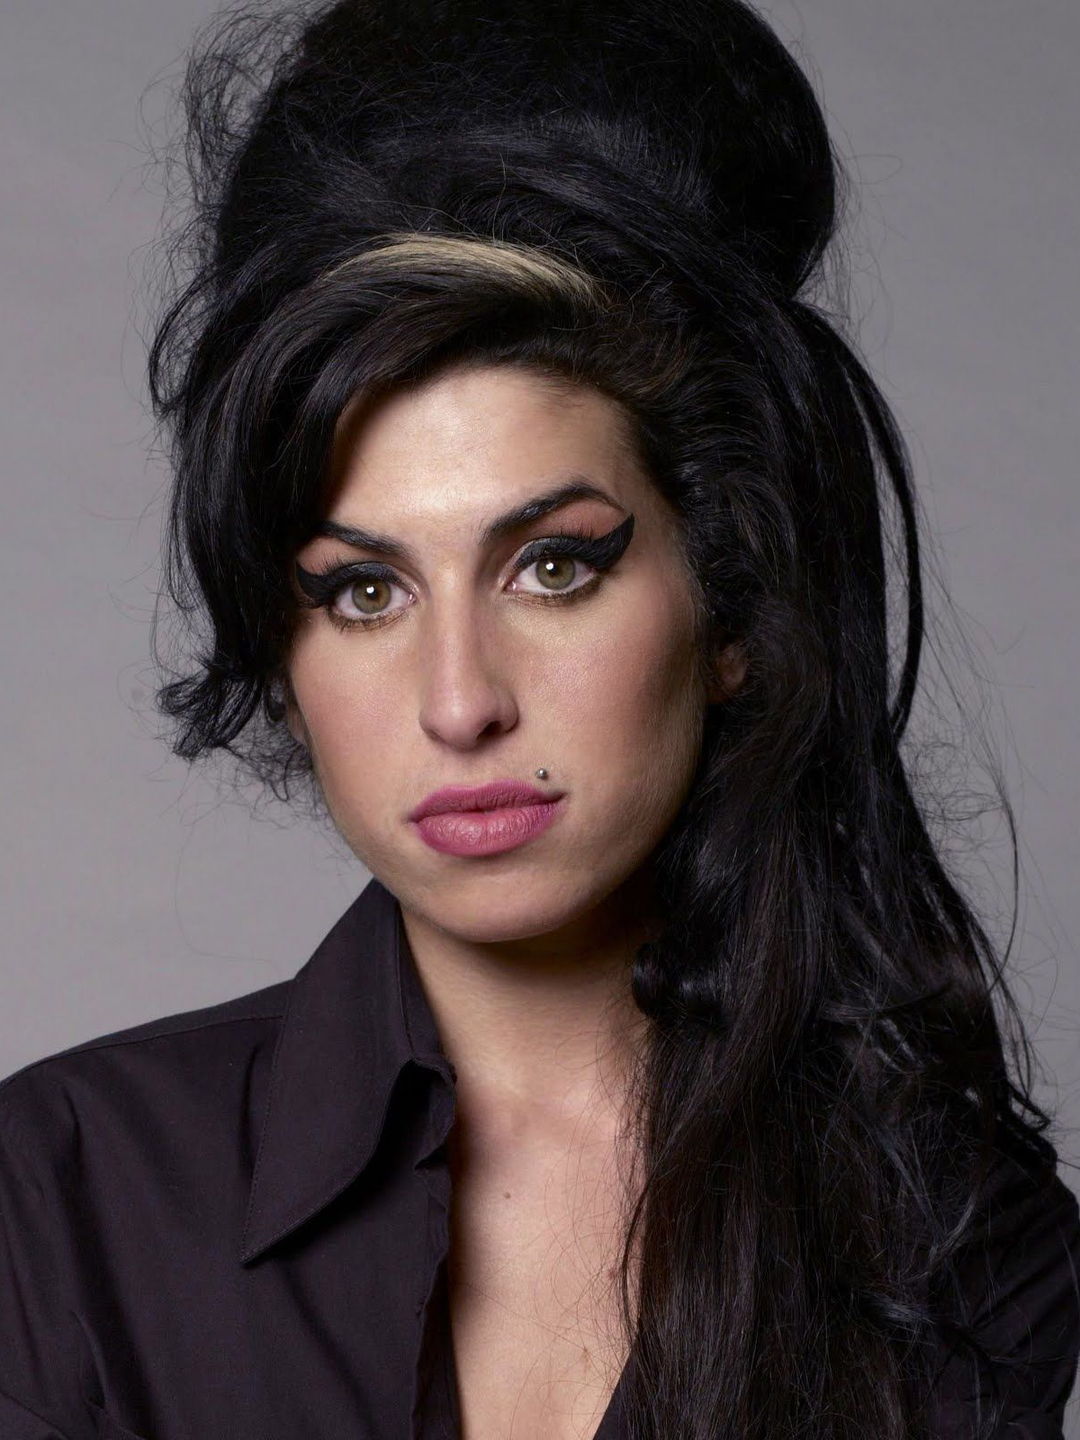 Amy Winehouse who is her father